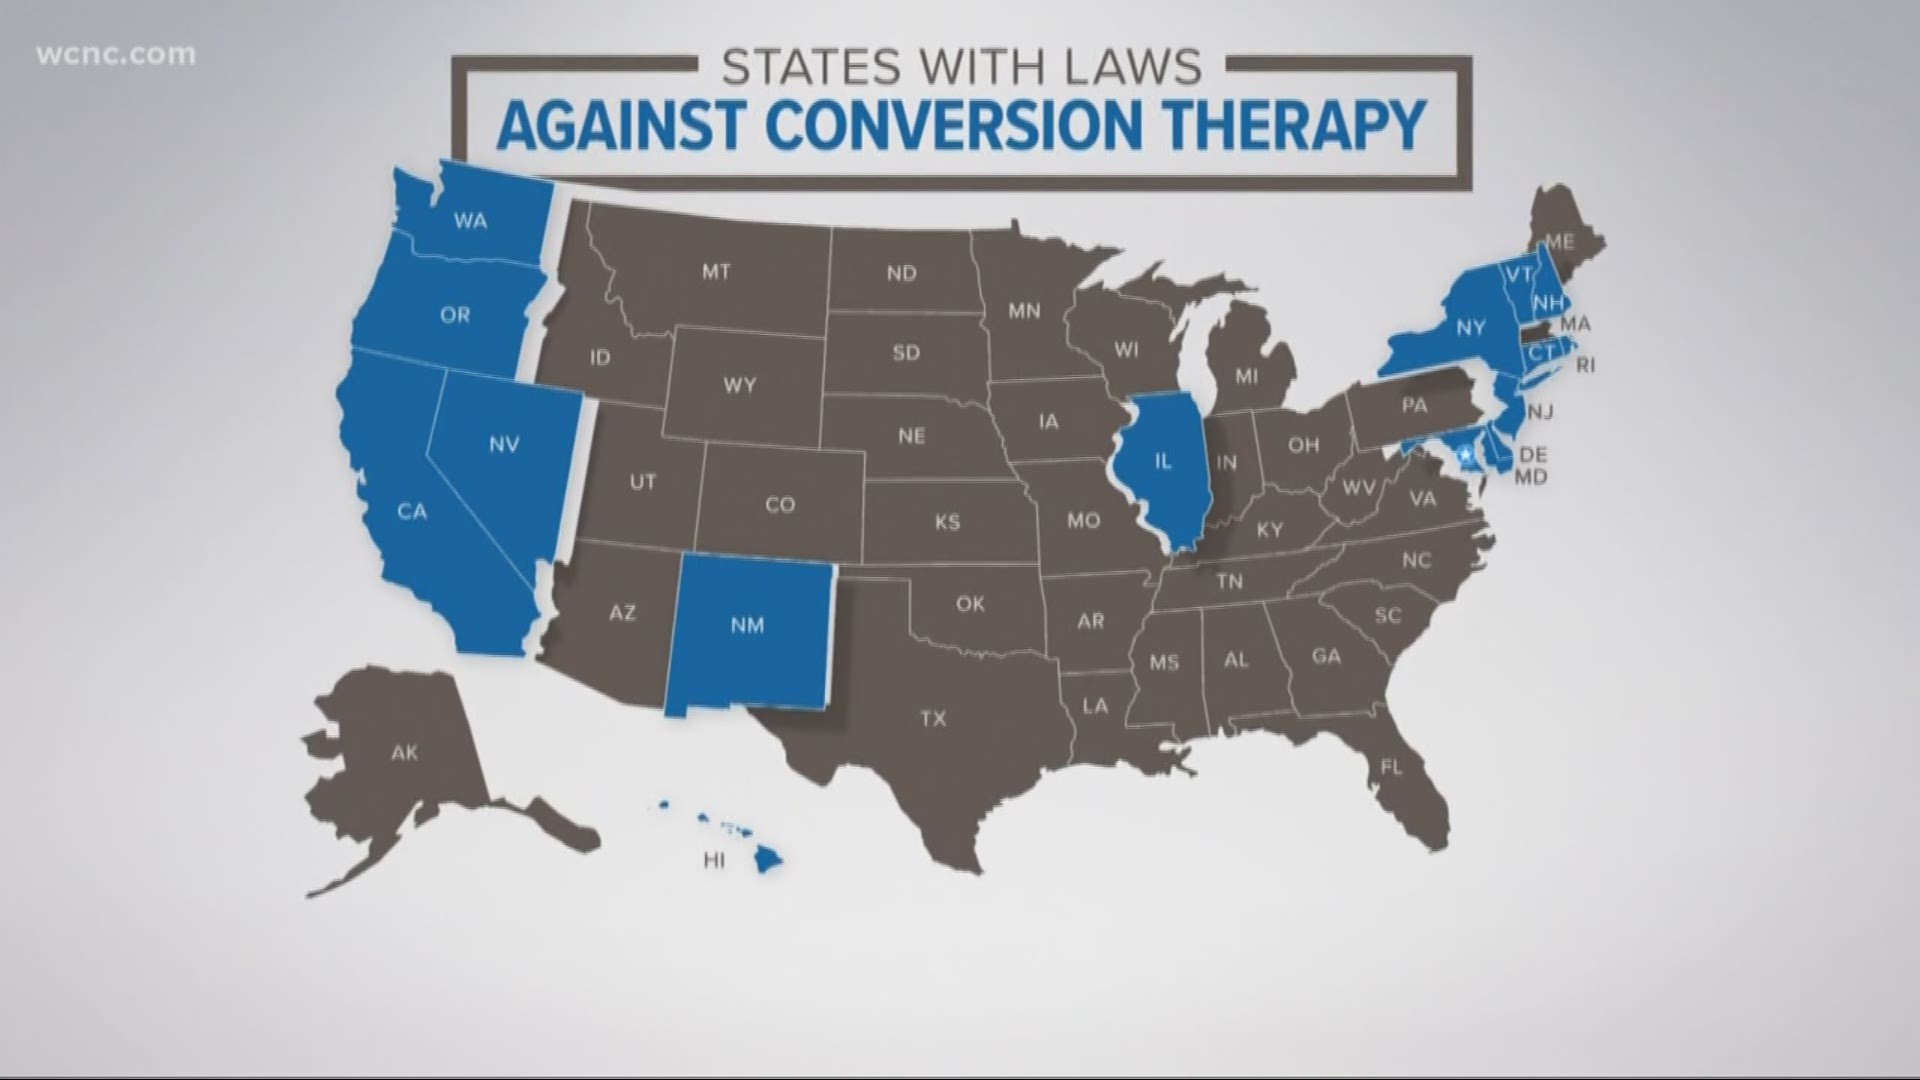 Three bills were introduced, but the bill getting the most attention is House Bill 516. It looks to ban conversion therapy, a practice touted as a way to cure same-sex attraction.